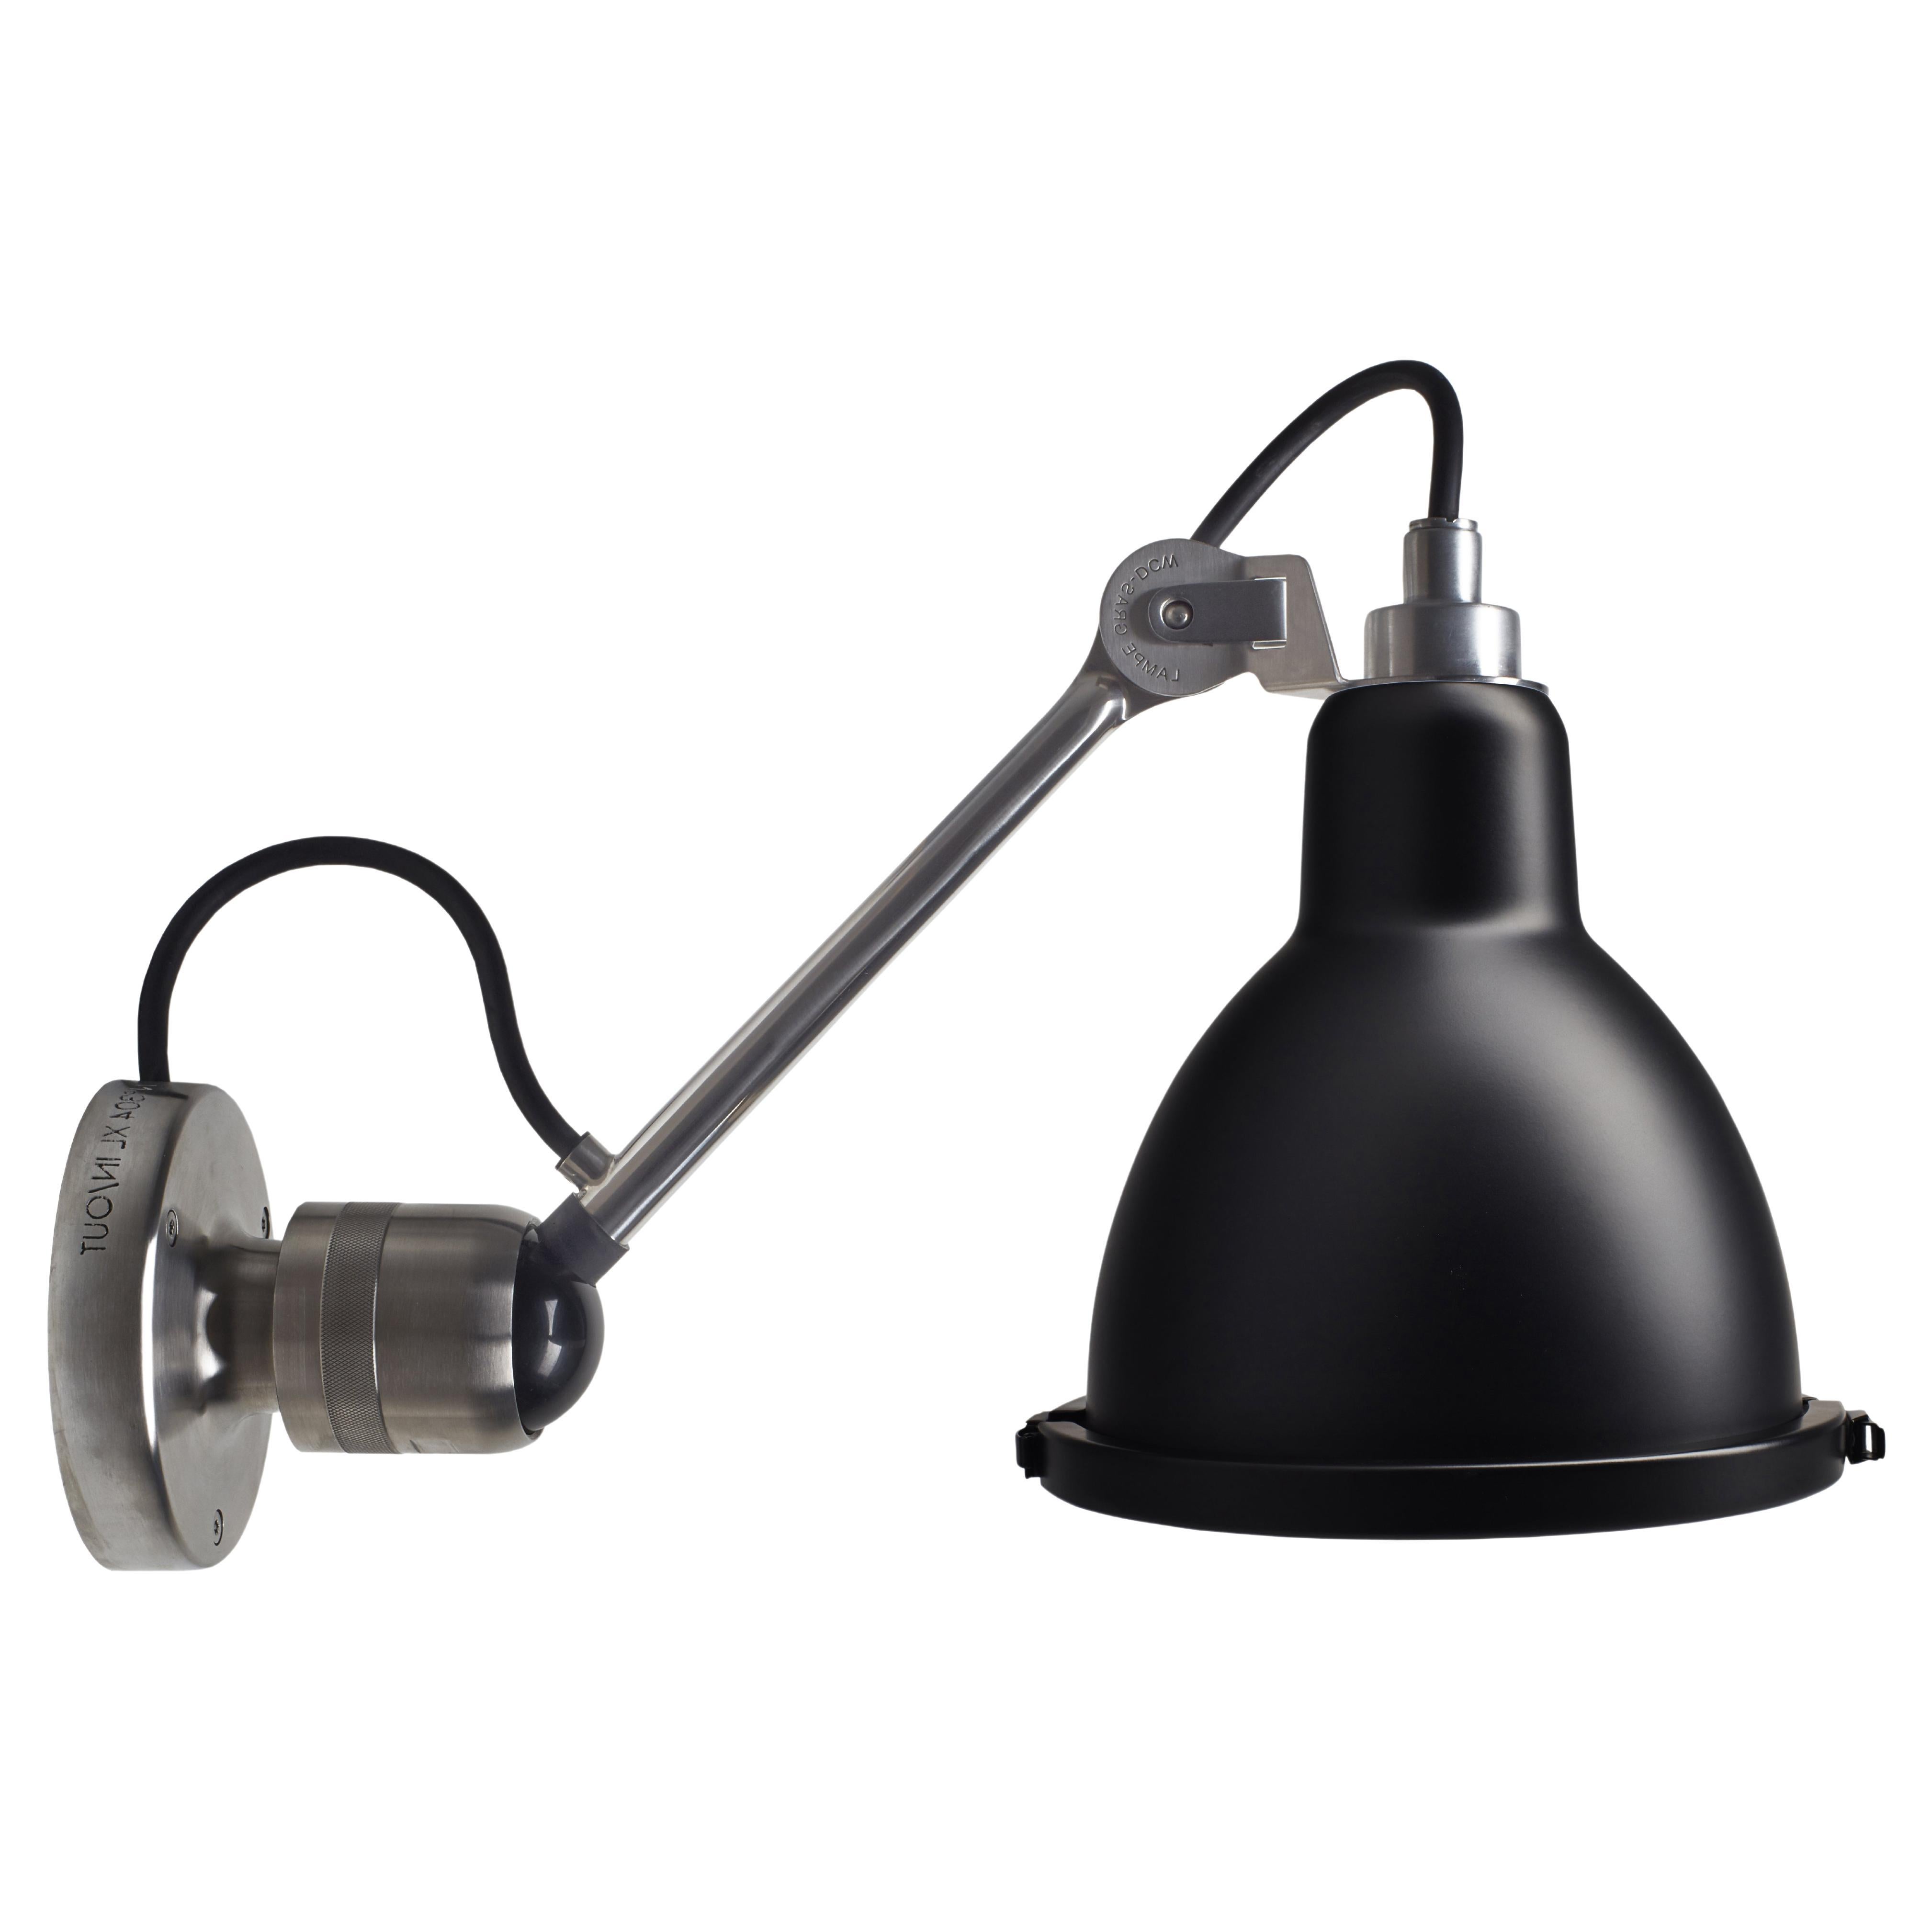 DCW Editions La Lampe Gras N°304 XL Round Wall Lamp in Bare Arm & Black Shade 1 For Sale